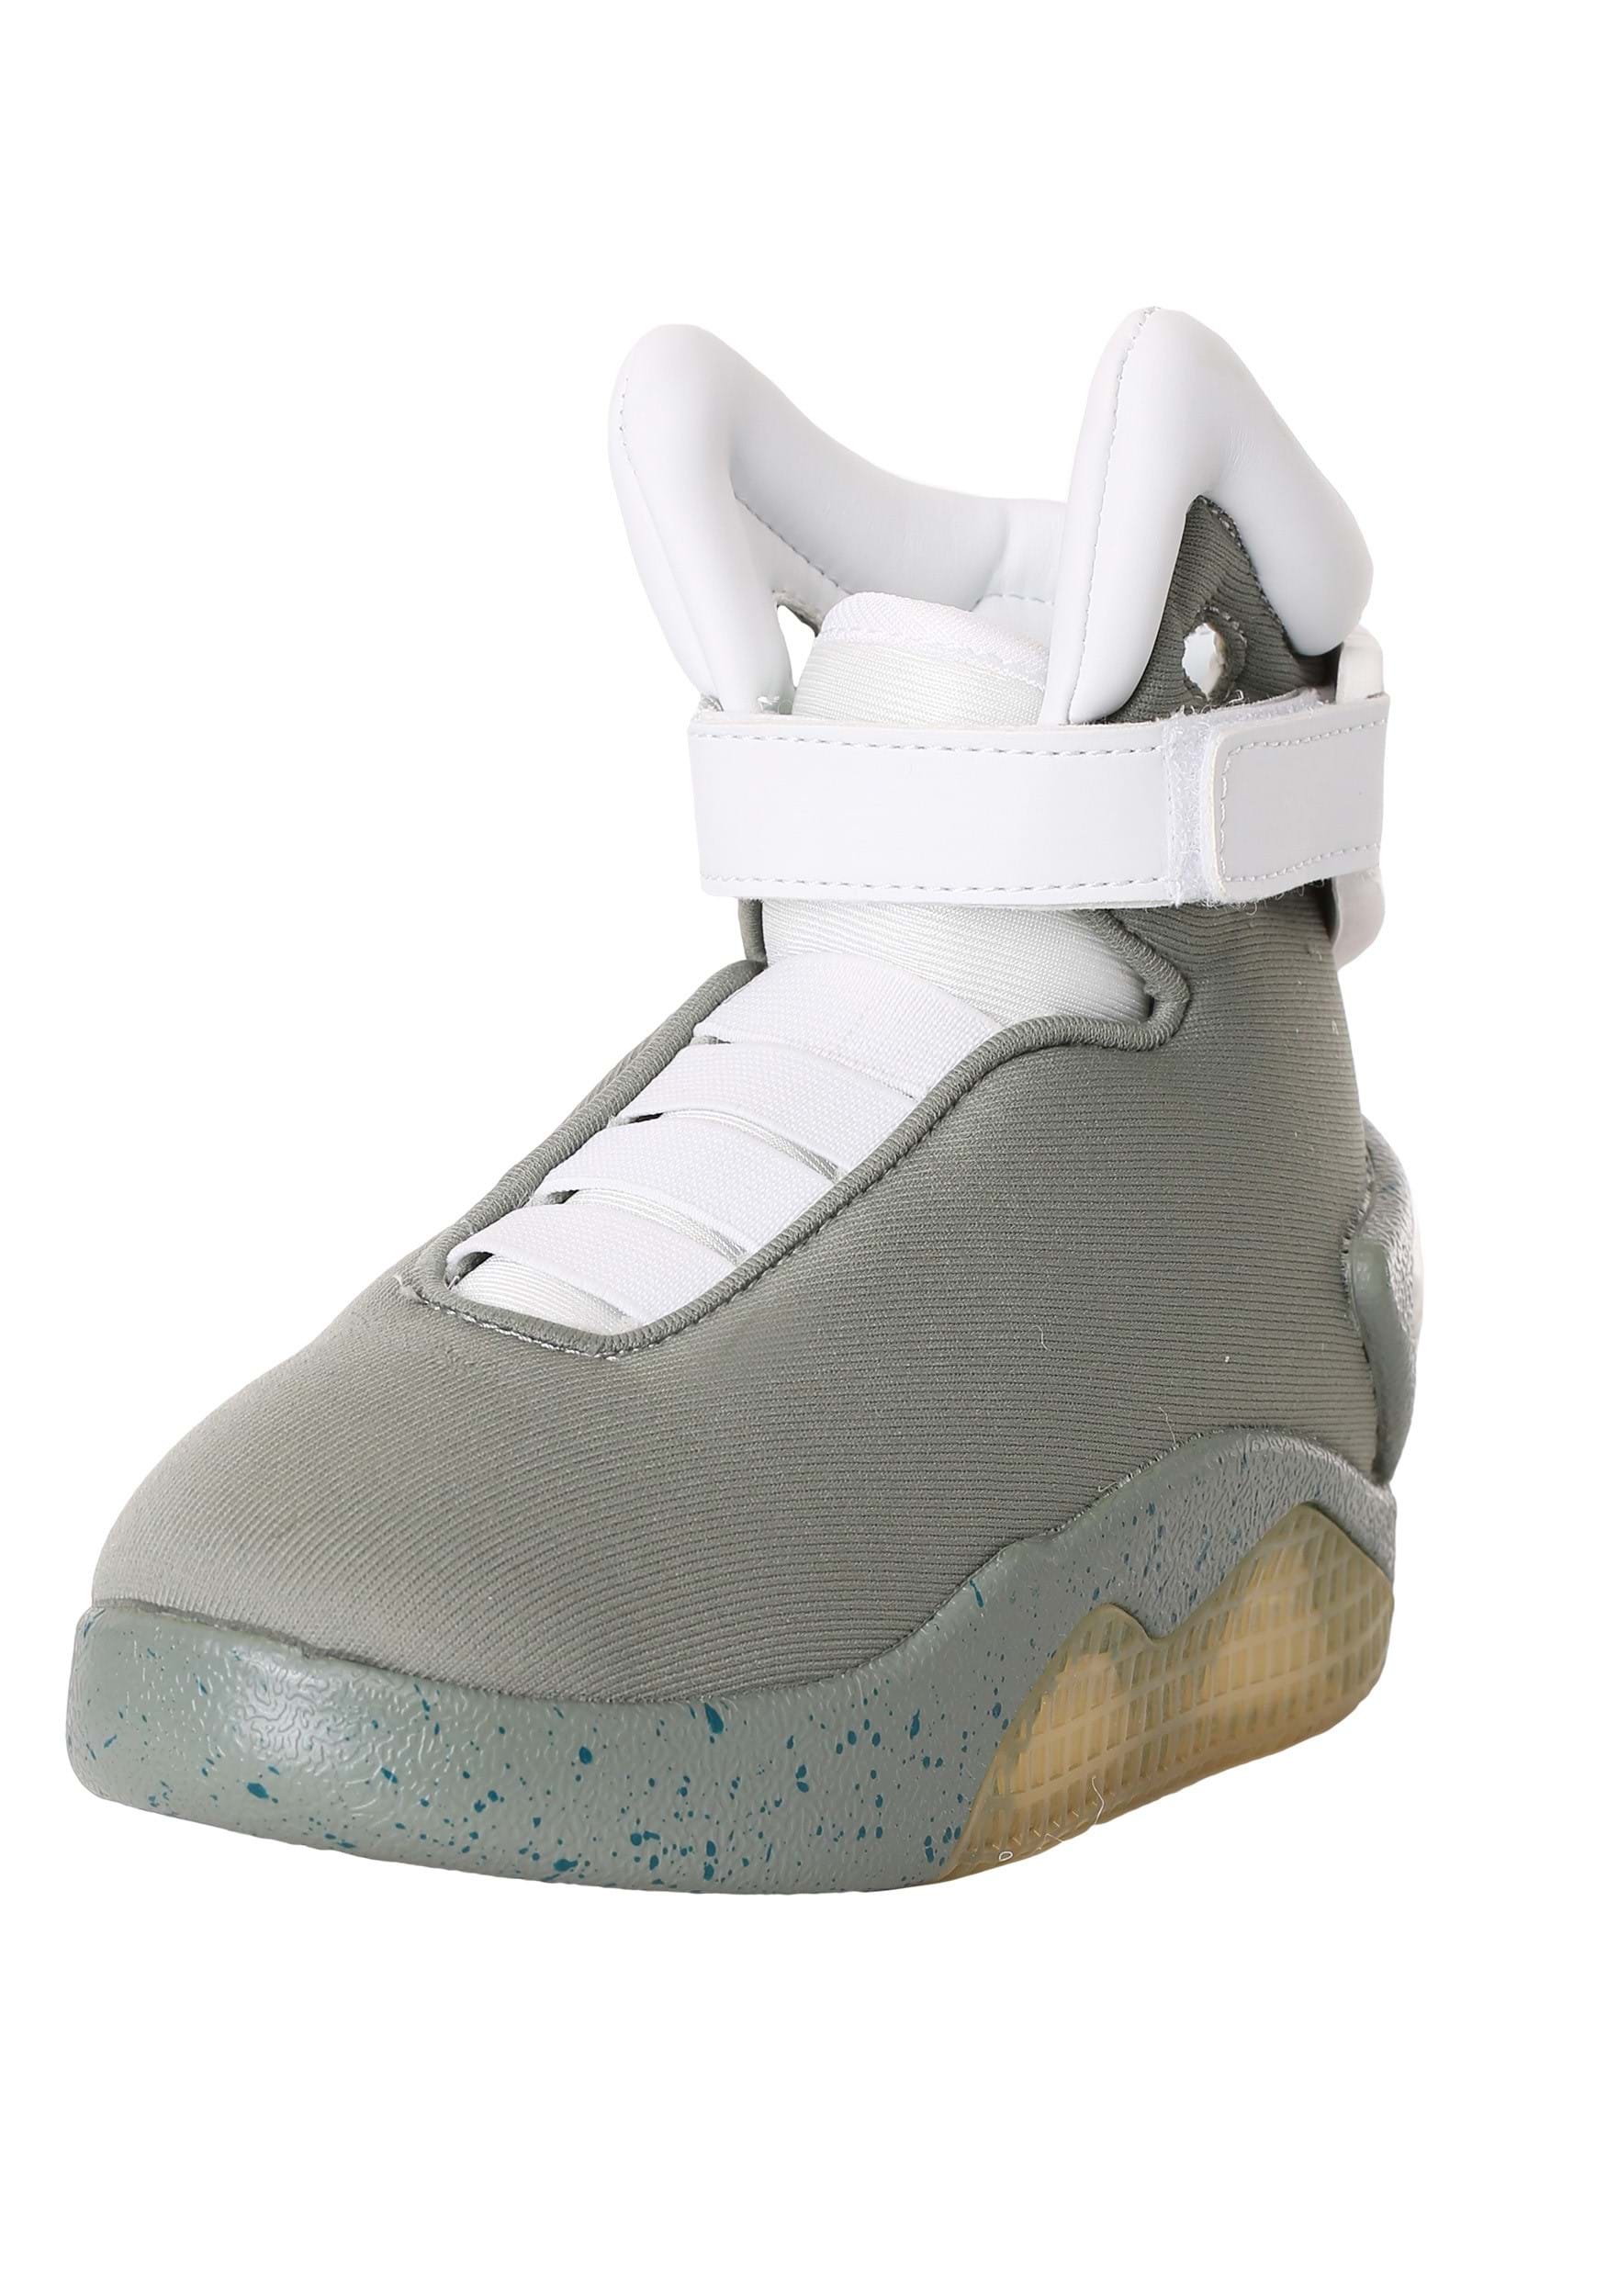 Image of Light Up Back to the Future Kid's Shoes ID BTF2247CH-12